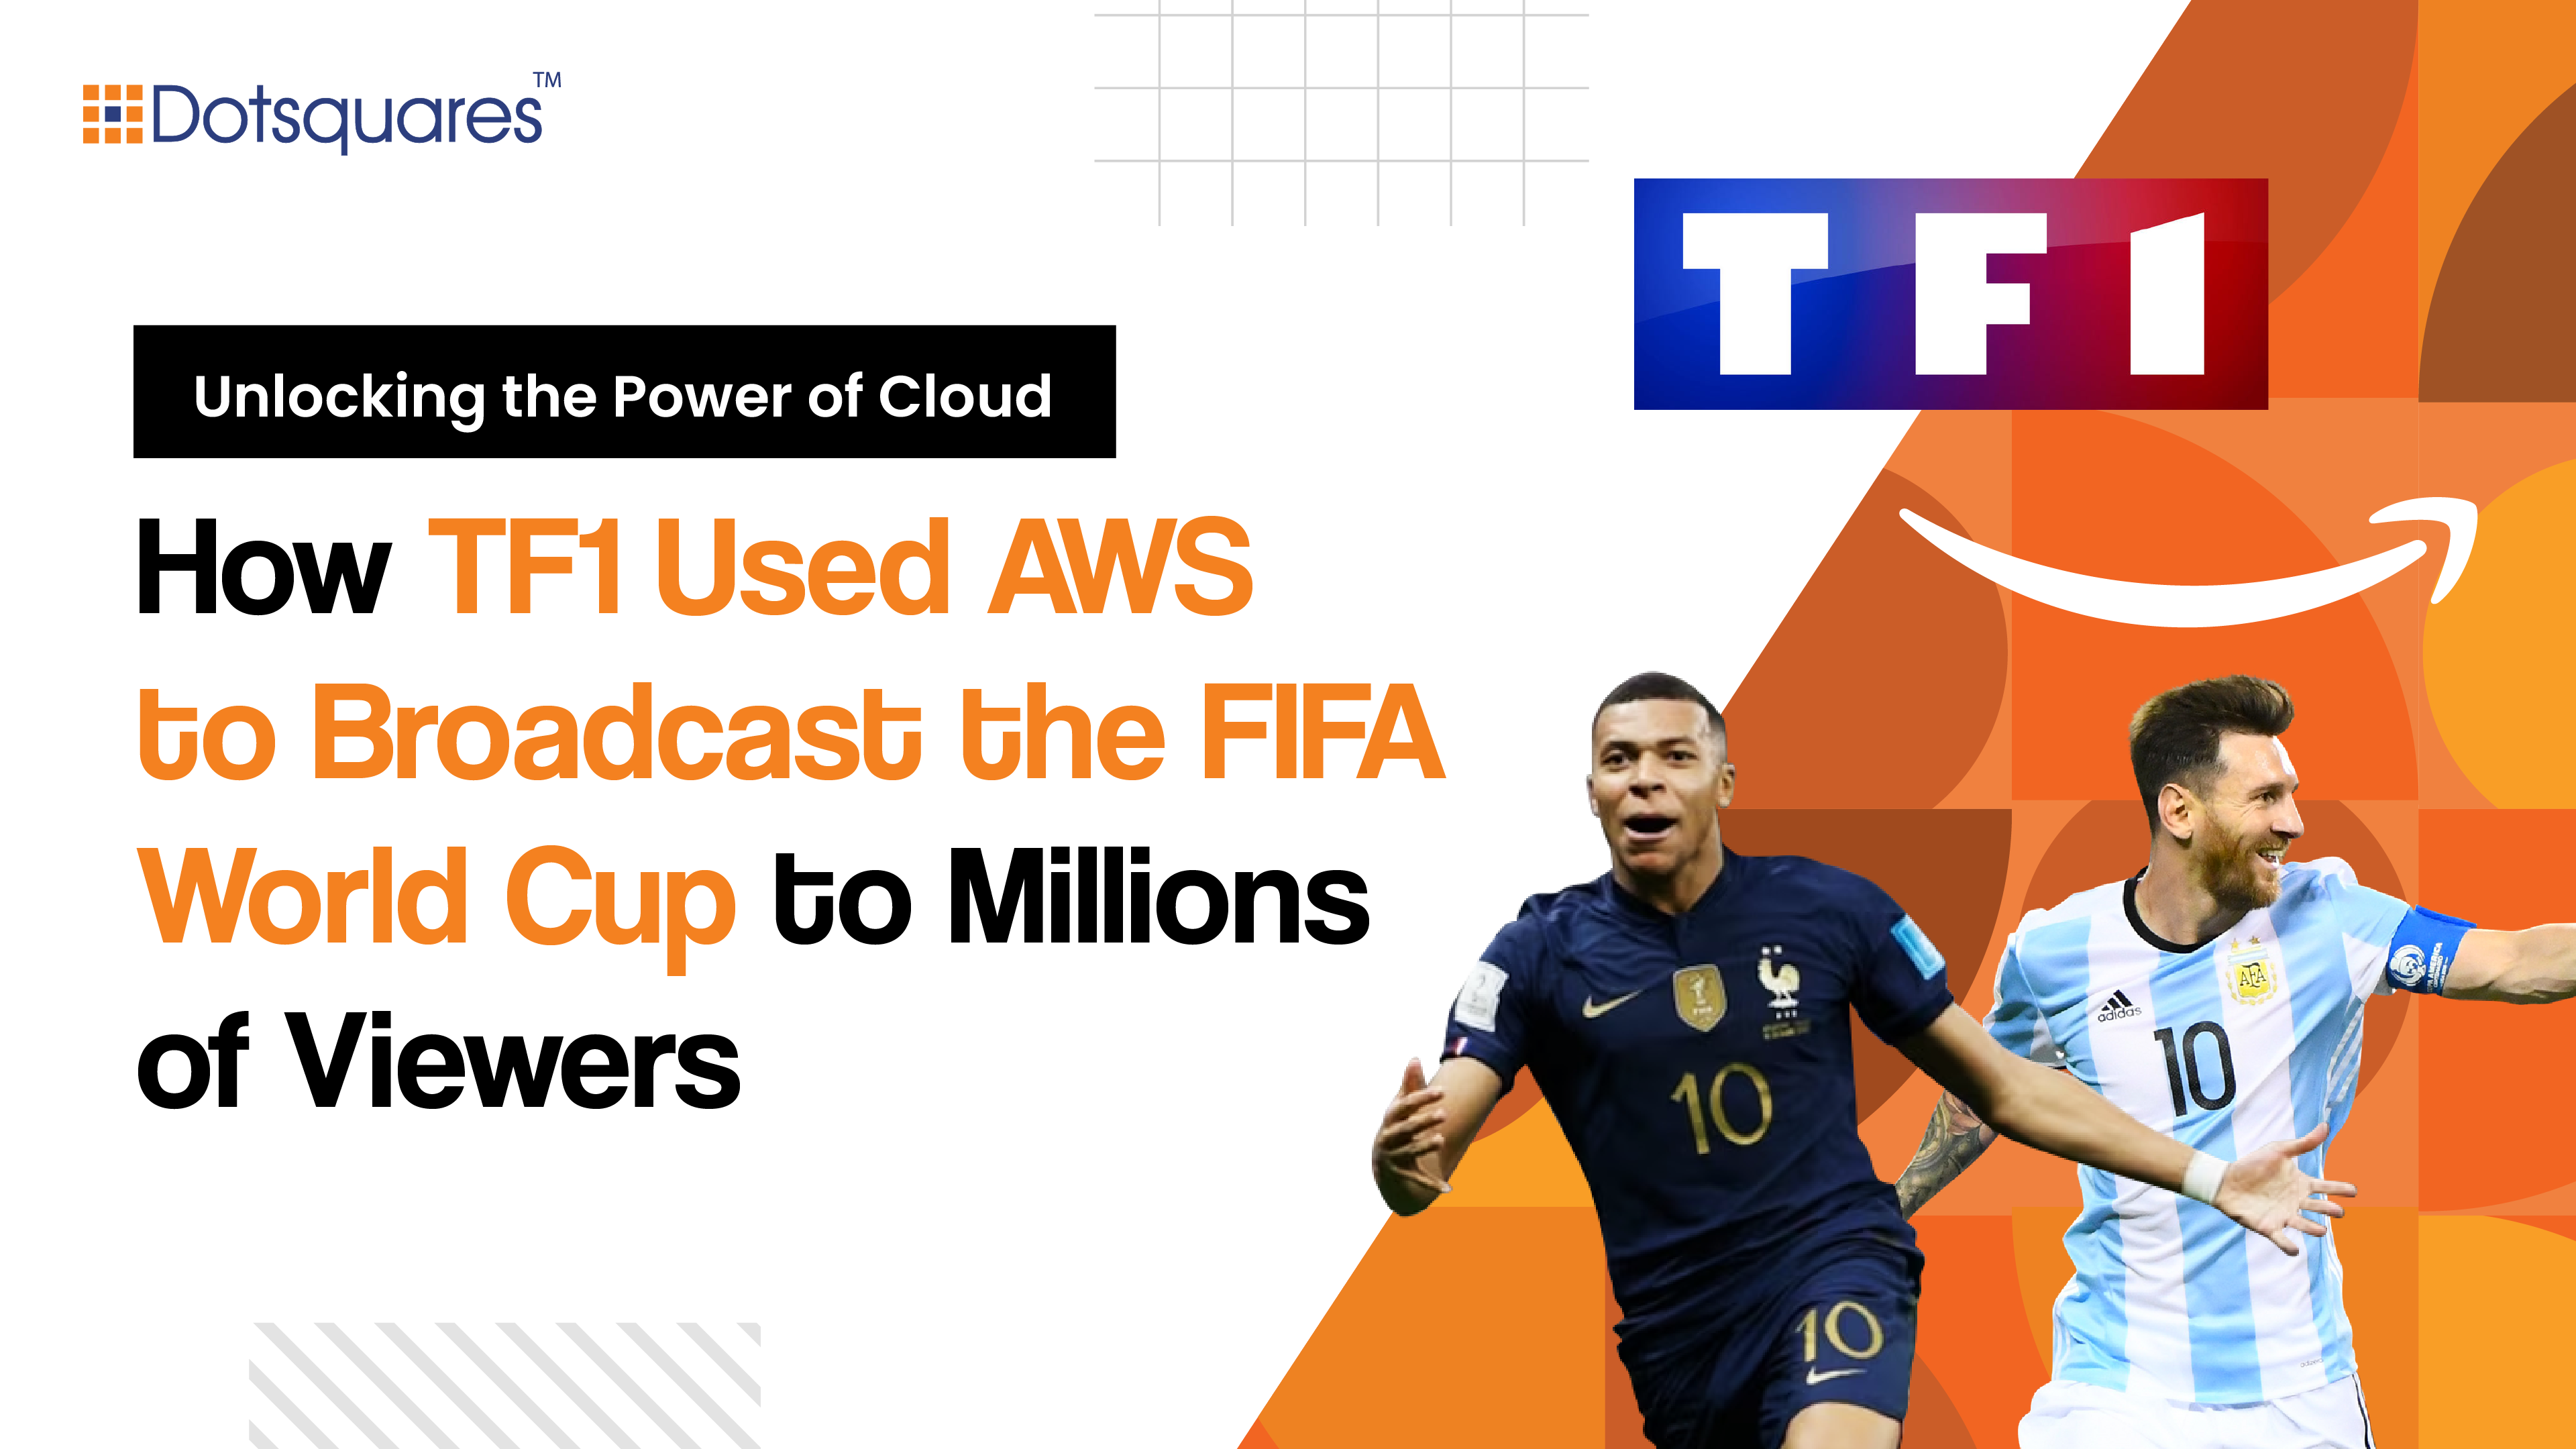 Unlocking the Power of Cloud: How TF1 Used AWS to Broadcast the FIFA World Cup to Millions of Viewers